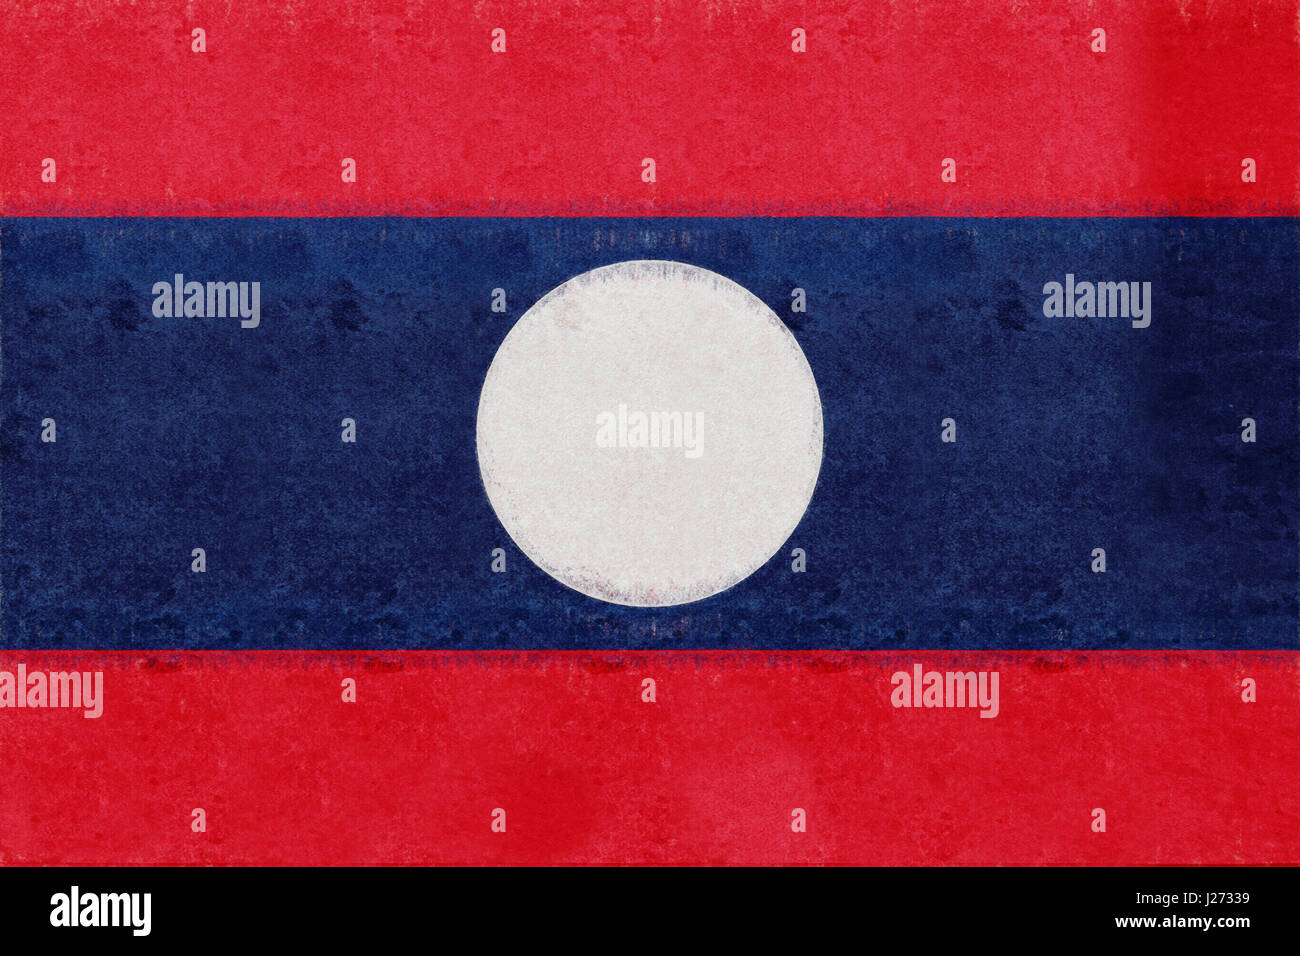 Illustration of the flag of Laos with a grunge look. Stock Photo